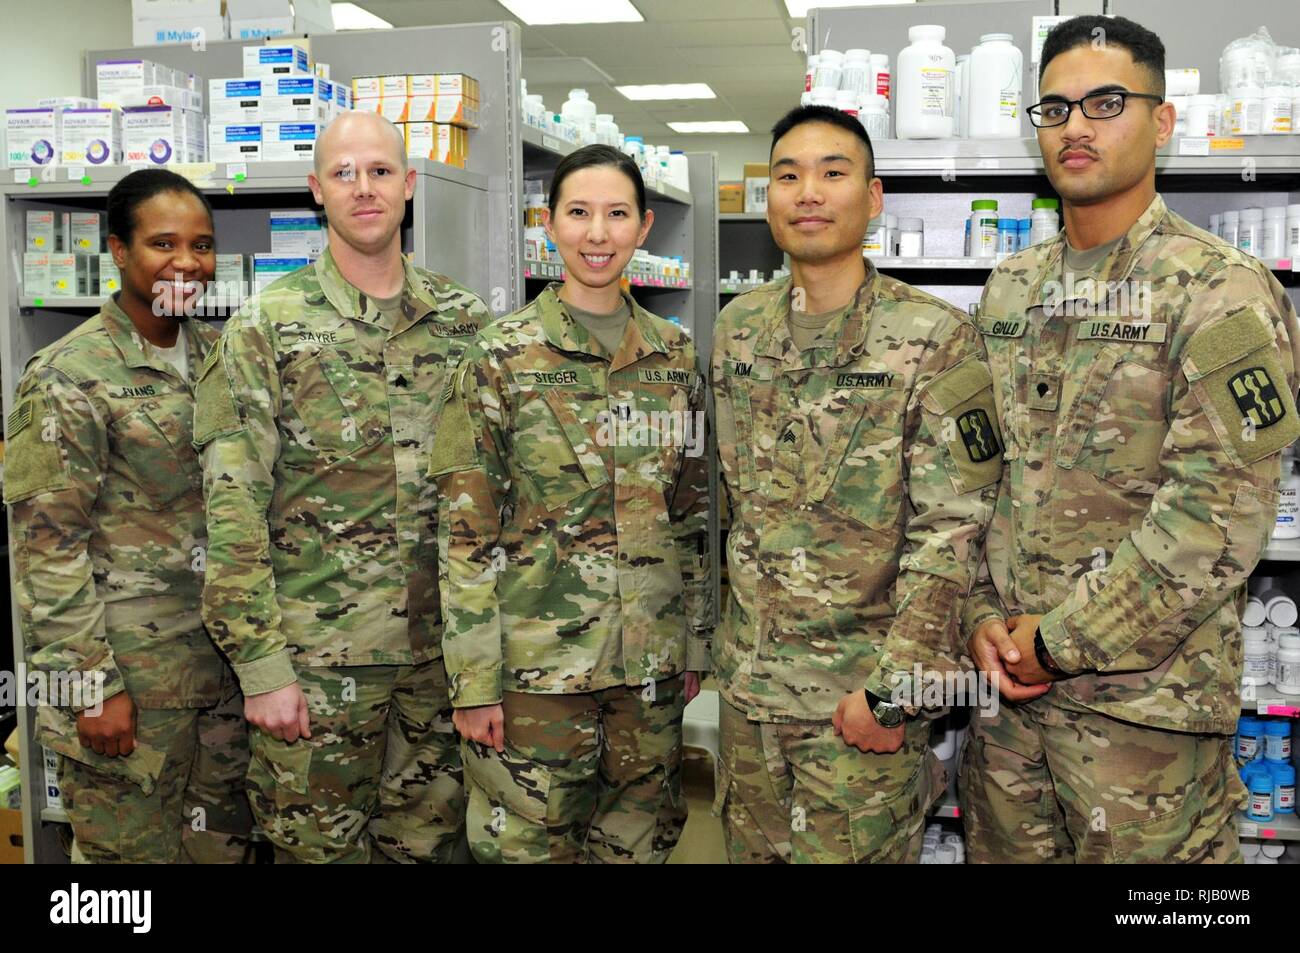 The 31st Combat Support Hospital pharmacy team provides pharmaceutical support to patients suffering from injuries and illnesses throughout the ARCENT area of operations. The team processes more than 3,500 outpatient prescriptions a month to service members and civilians while providing support to inpatient care and other facilities throughout the region. Stock Photo